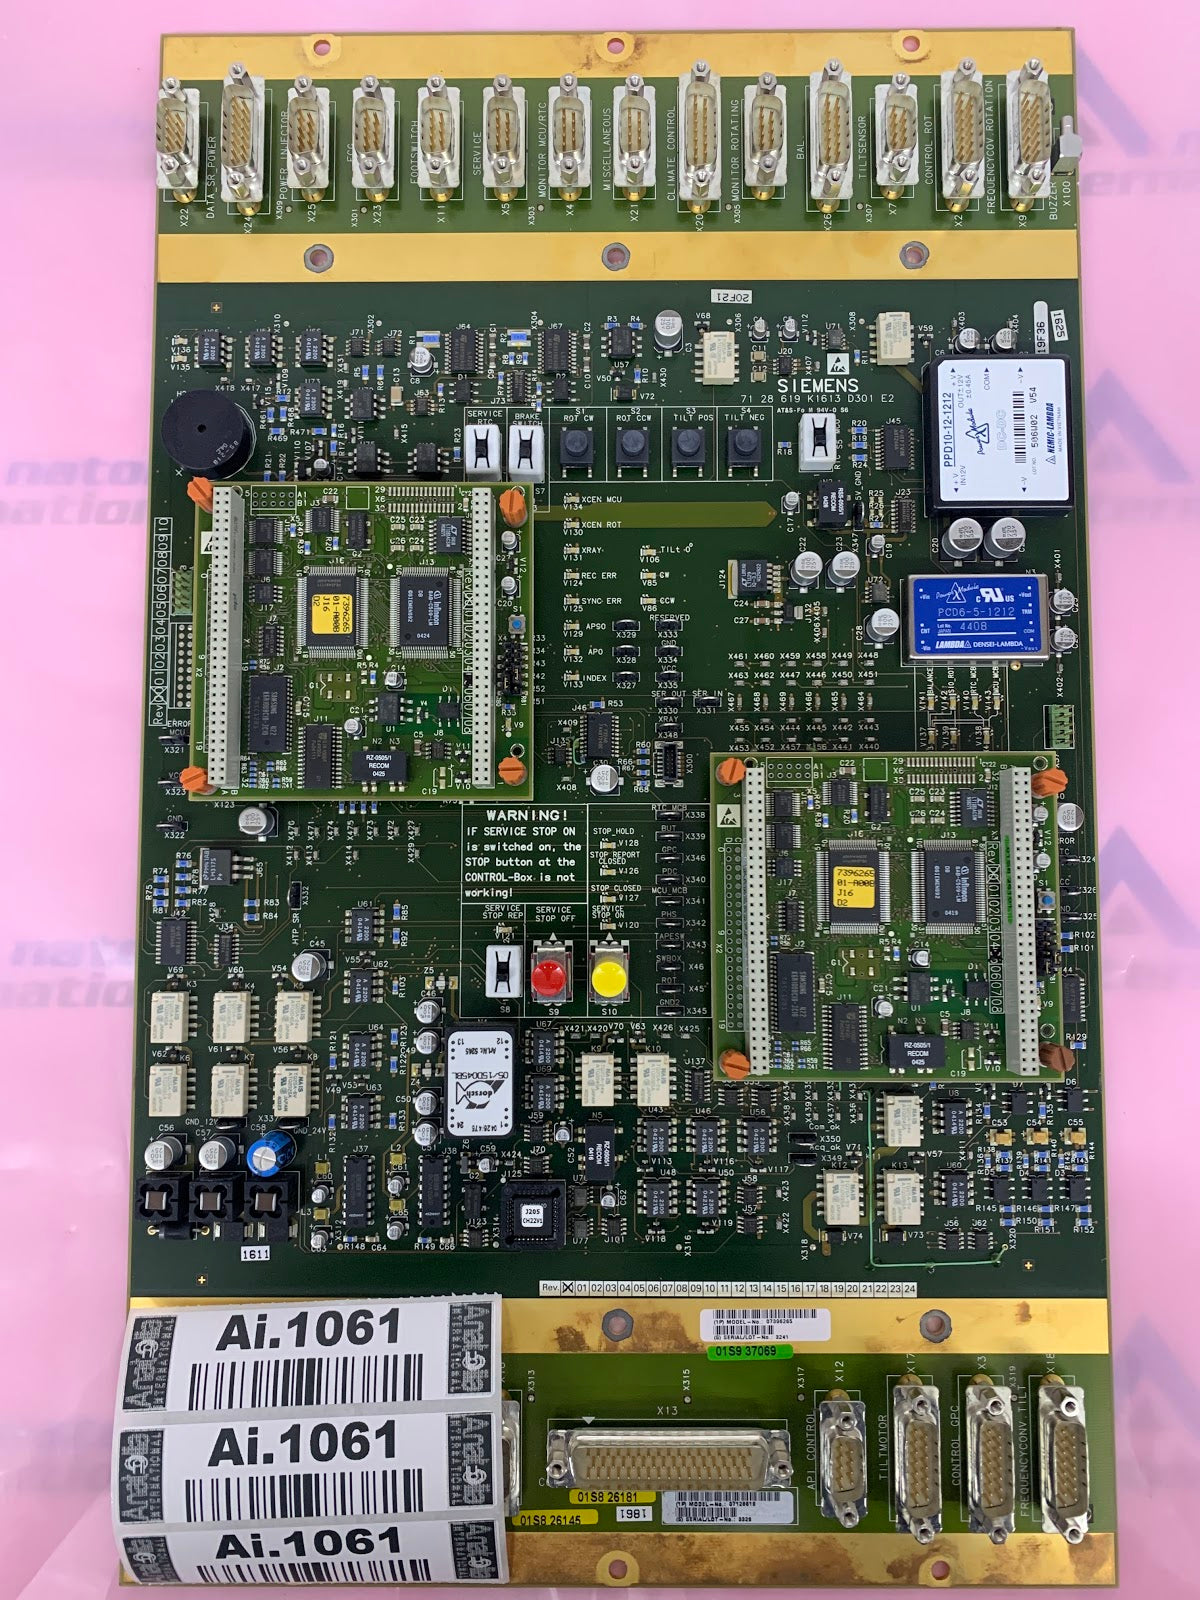 MCU-RTC w/ MCB’s For Siemens Somatom sensation 16 P/N: 07396265, 7128619. Pulled from functioning Equipment, contact for more info.